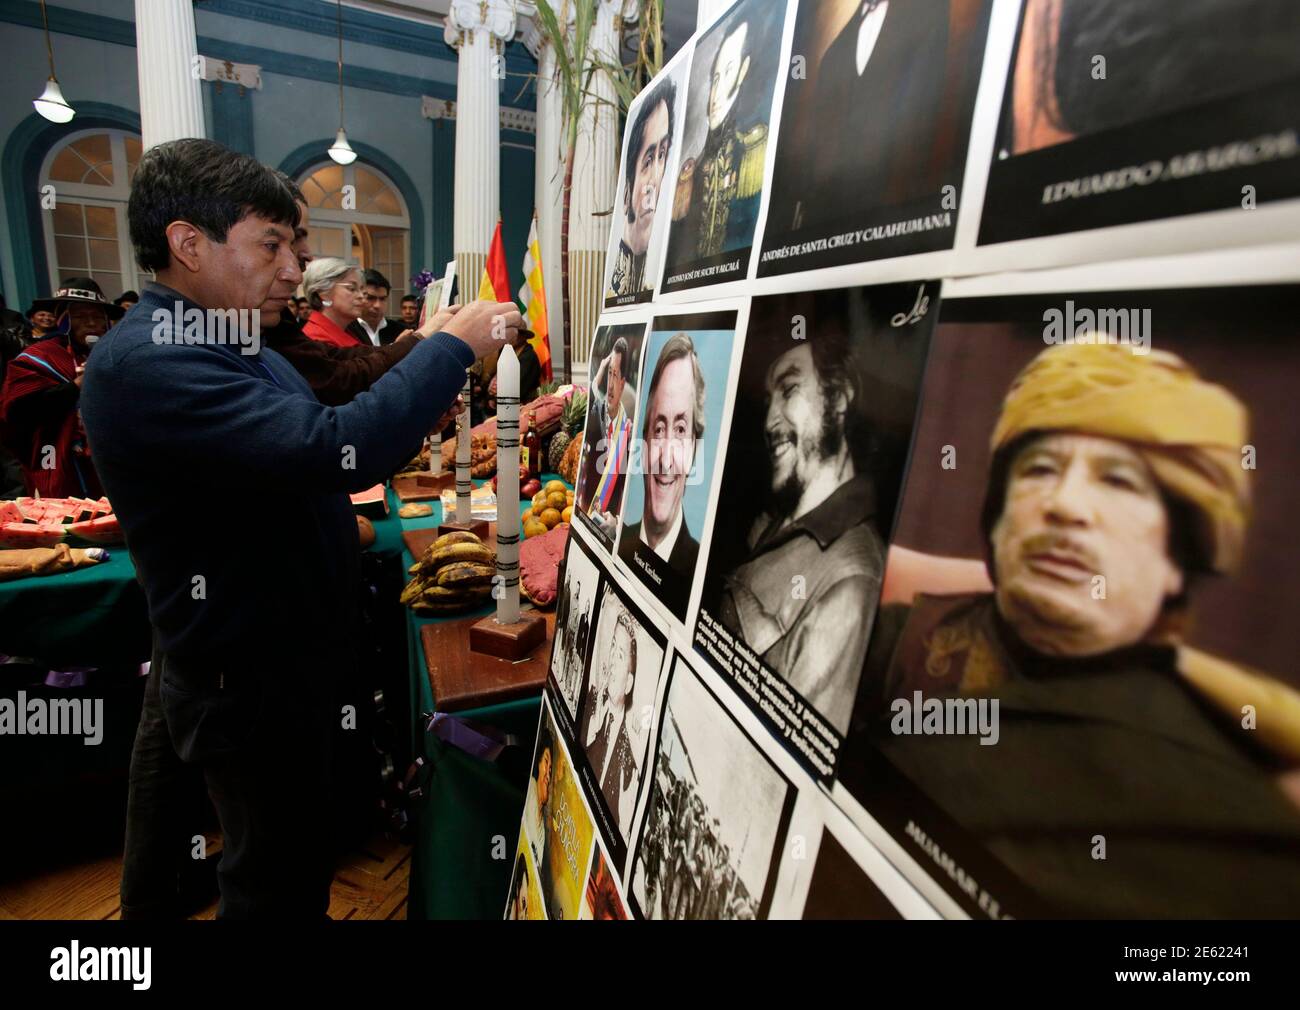 Bolivian Foreign Minister David Choquehuanca (L) lights a candle during an All Saints' Day celebration in front of Images of Libya's Muammar Gaddafi, Argentine Ernesto "Che" Guevara, Nestor Kirchner and Venezuela's Hugo Chavez in La Paz, November 1, 2013. Traditionally, indigenous Bolivians celebrate All Saints Day by paying homage to their dead ones with a feast of home-baked, doll-shaped breads, fresh fruit and coca leaves and flowers. The syncretism practiced by the Aymaras, a blend of Catholicism and indigenous beliefs, calls for the offerings to be neatly placed on top of graves, and then Foto de stock